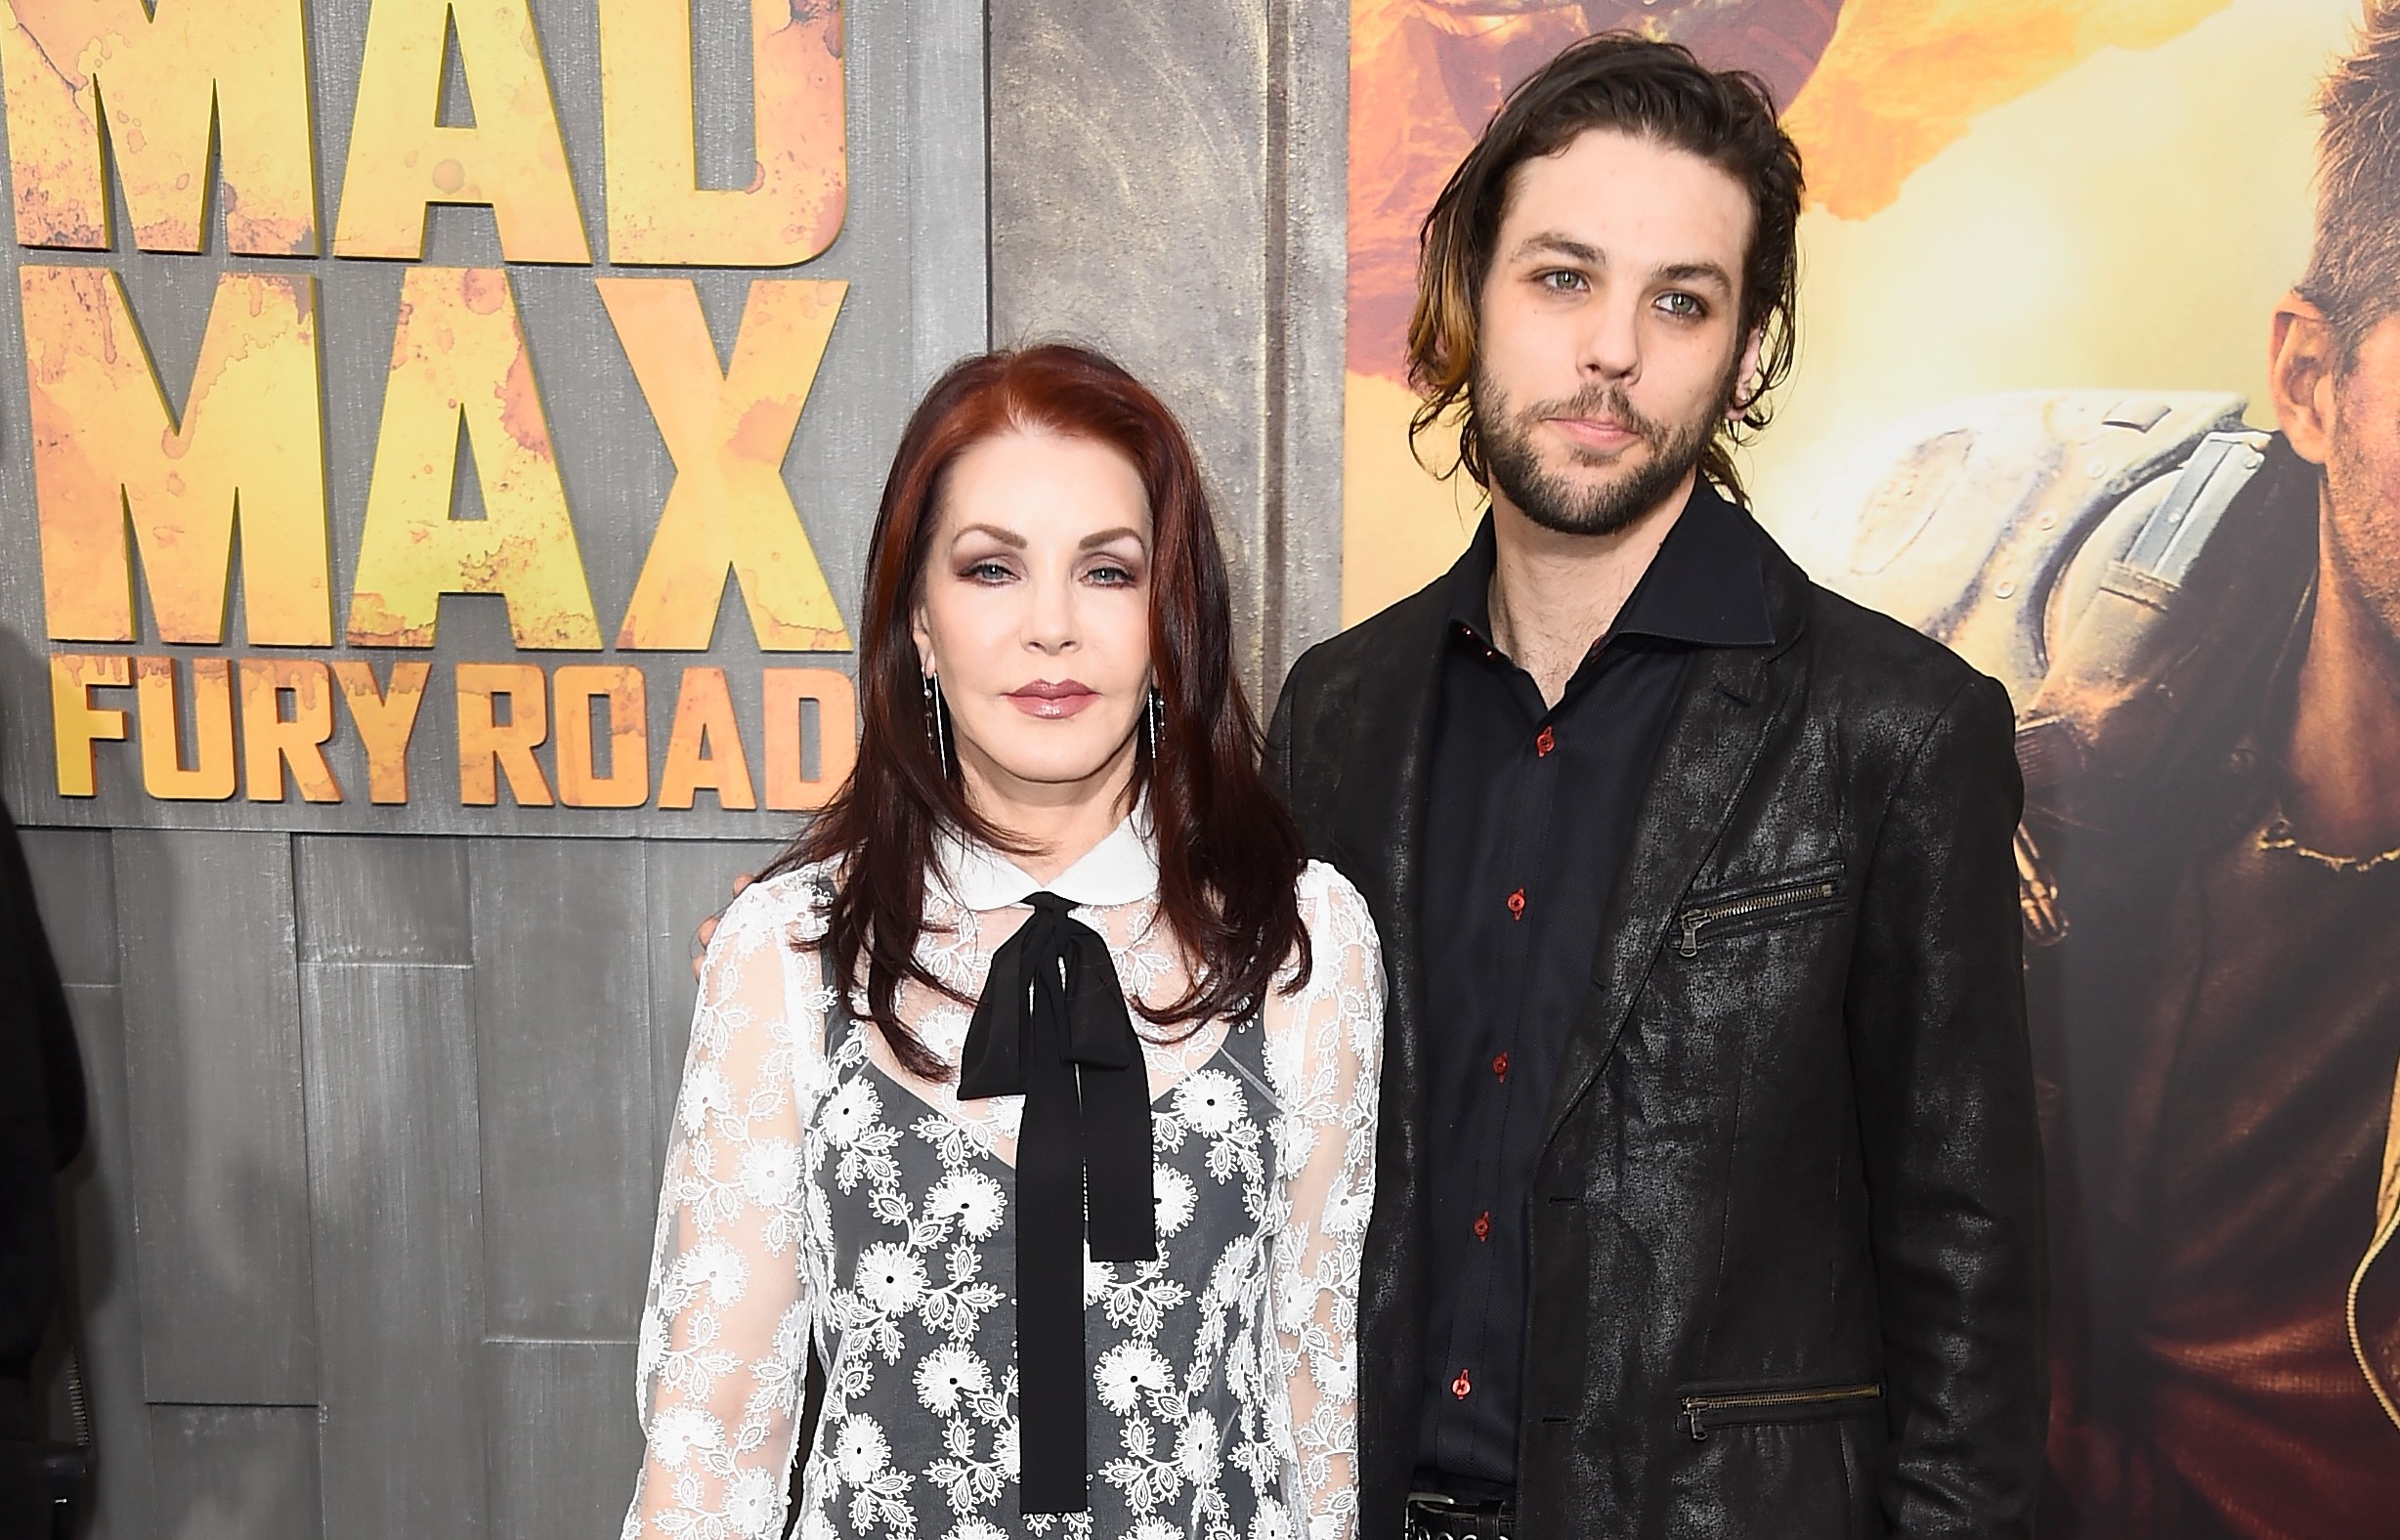 Actress Priscilla Presley and her son, Navarone Garibaldi Garcia, arrive at the Los Angeles premiere of 'Mad Max: Fury Road' at TCL Chinese Theatre IMAX, on May 7, 2015 in Hollywood, California. | Source: Getty Images